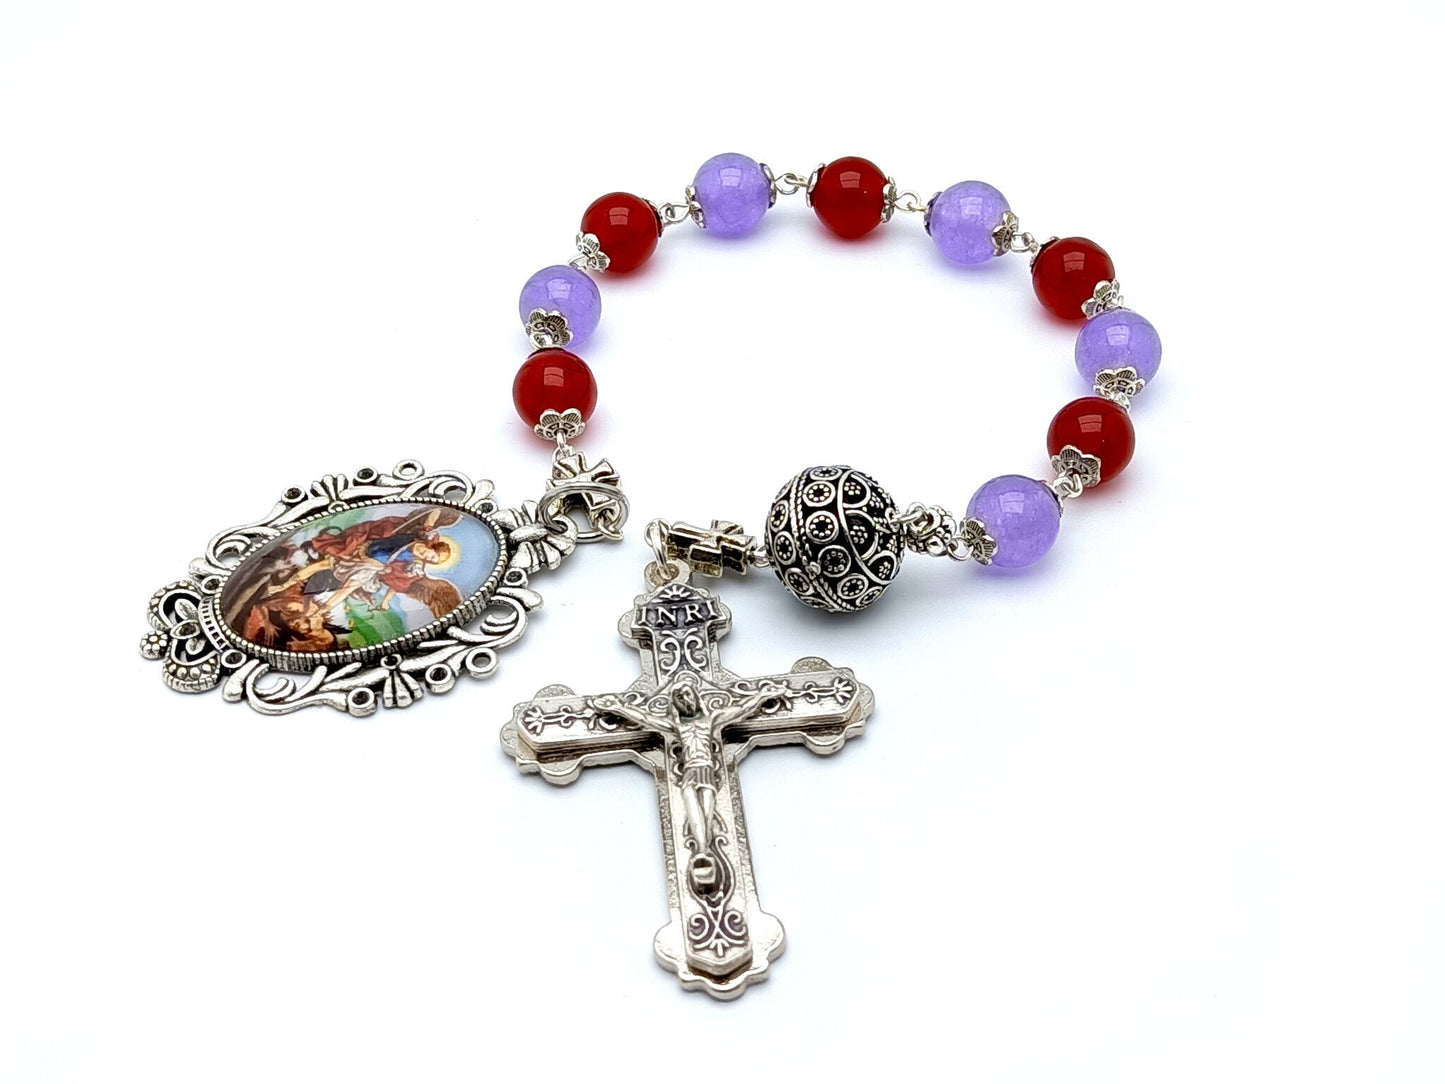 Saint Michael unique rosary beads single decade rosary with ruby and alexandrite gemstone beads, silver crucifix and picture end medal.